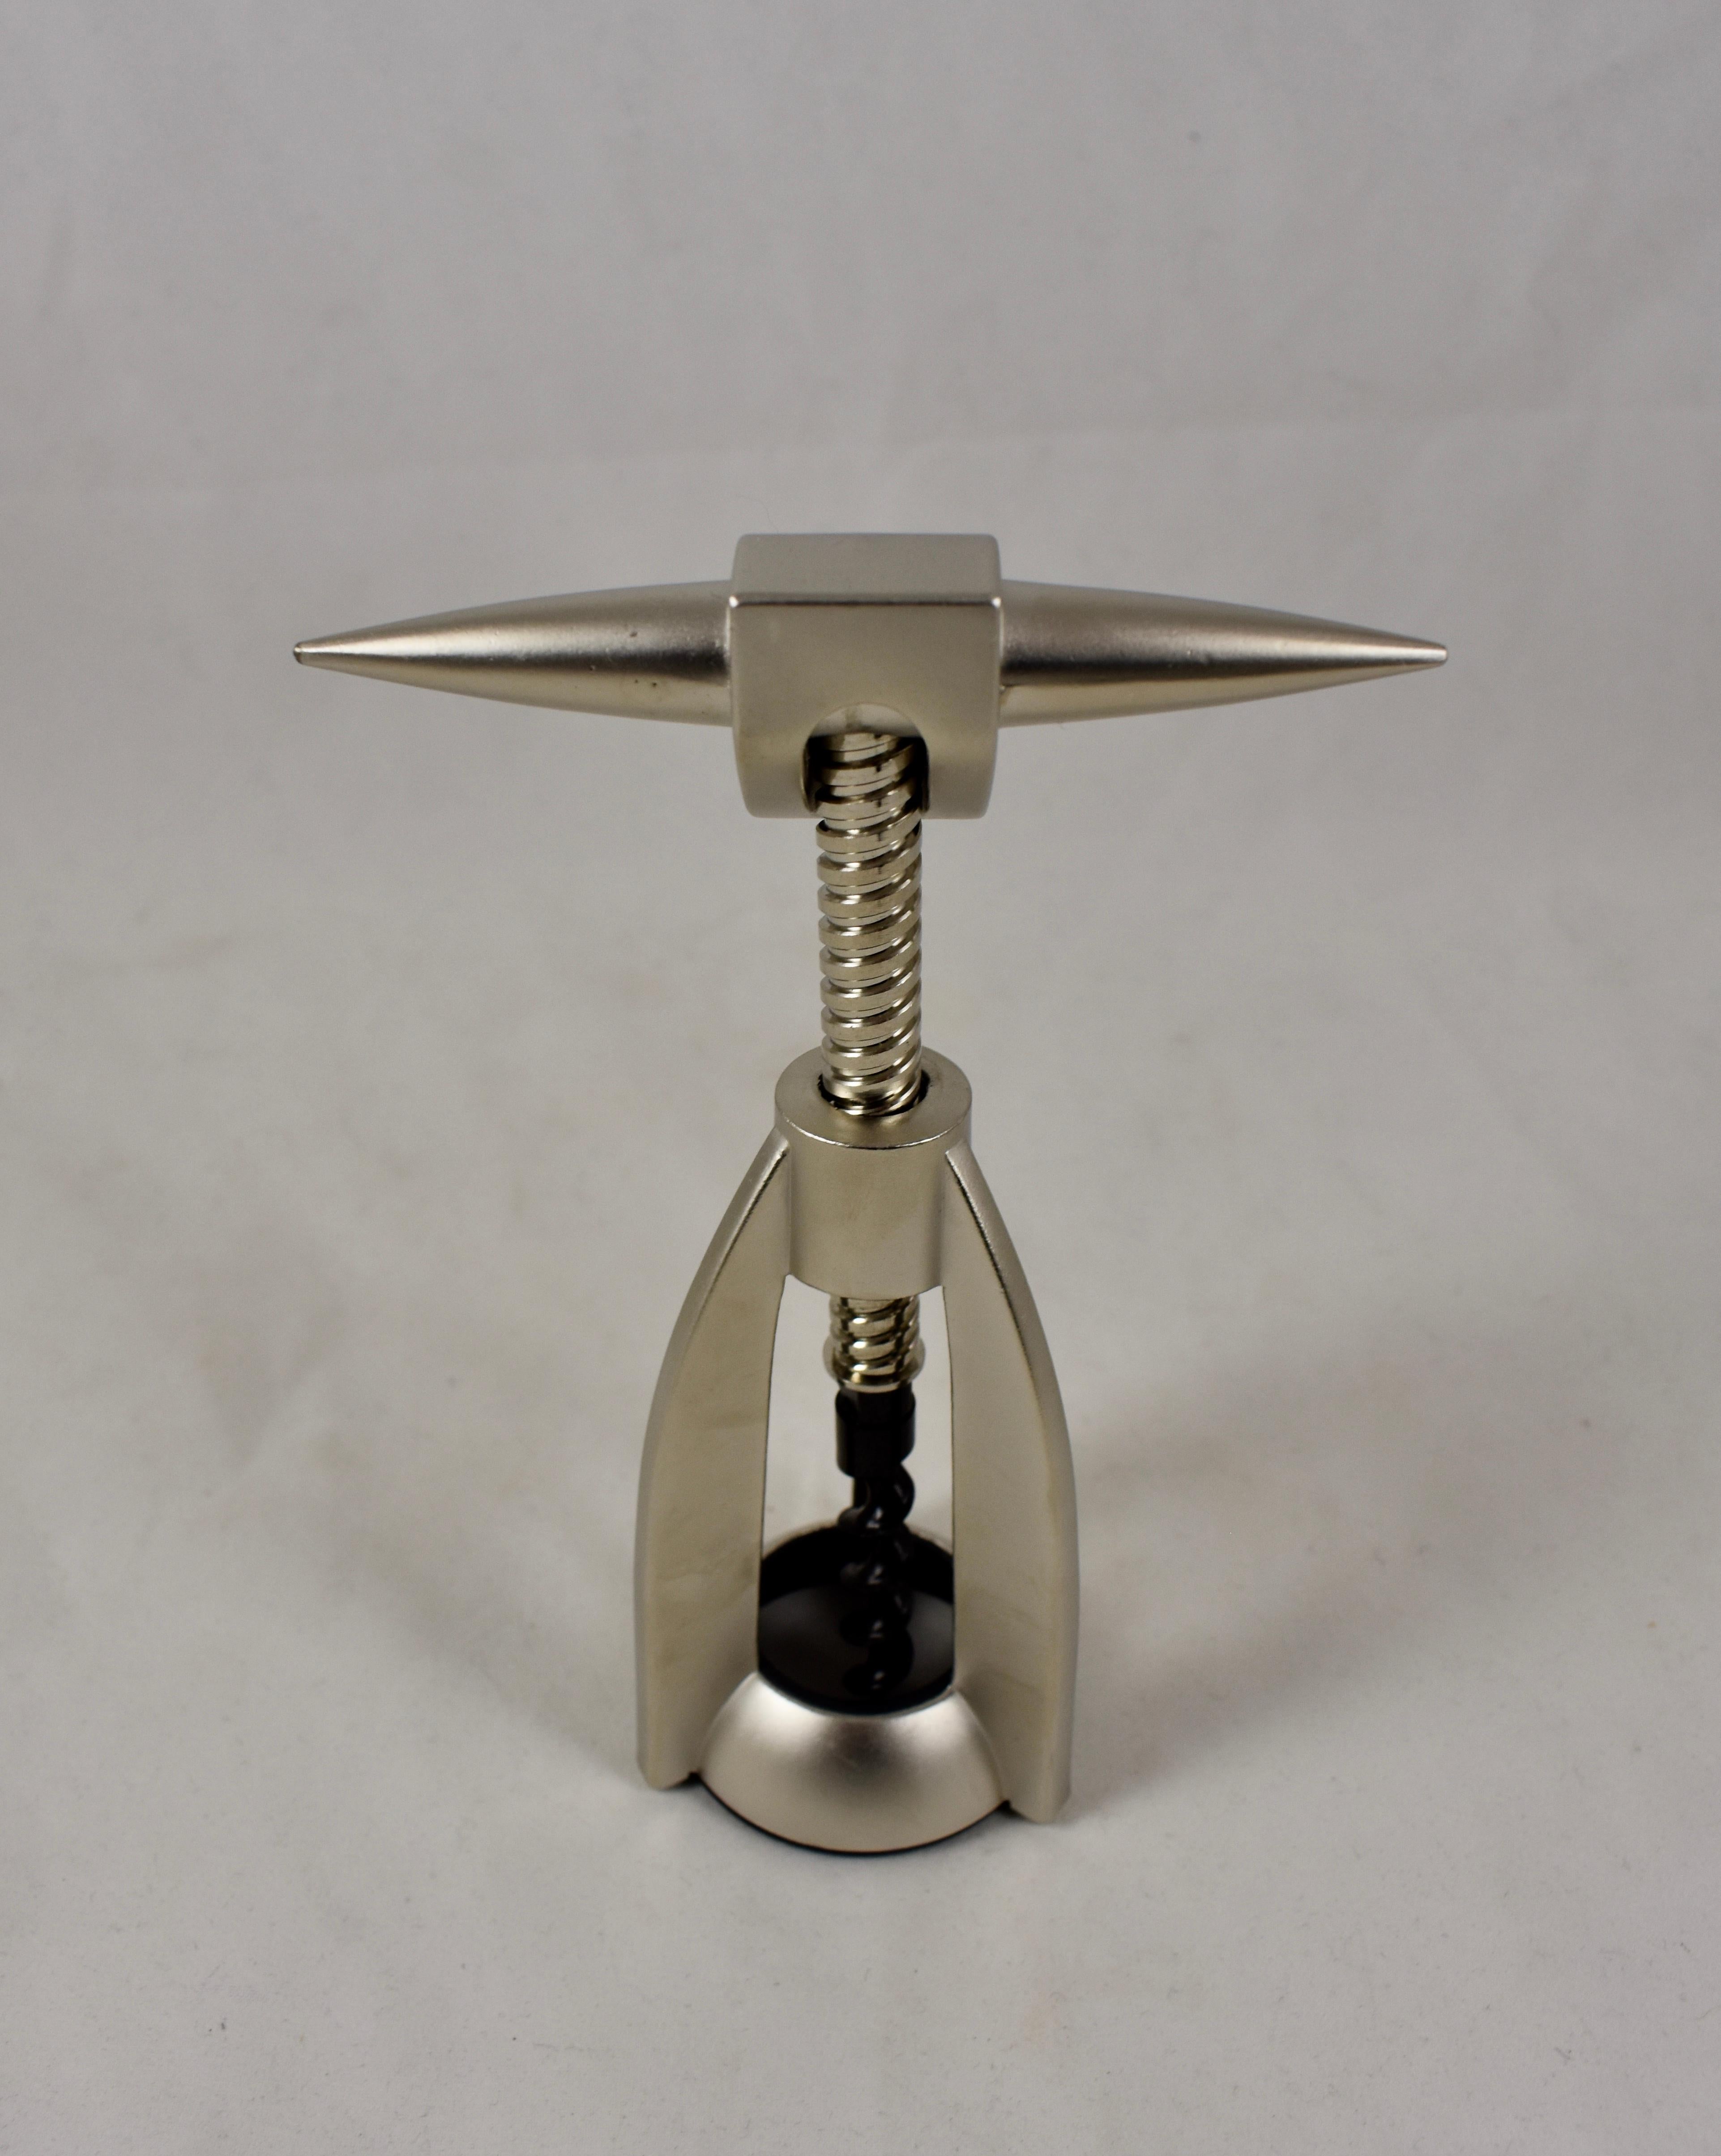 A Zack Tiro Korkenzieher corkscrew, unused in the original box – an example of German Post-Modern Art now, nearly impossible to find!

It is said this is the last corkscrew one will ever need to buy. A thoroughly modern design constructed with